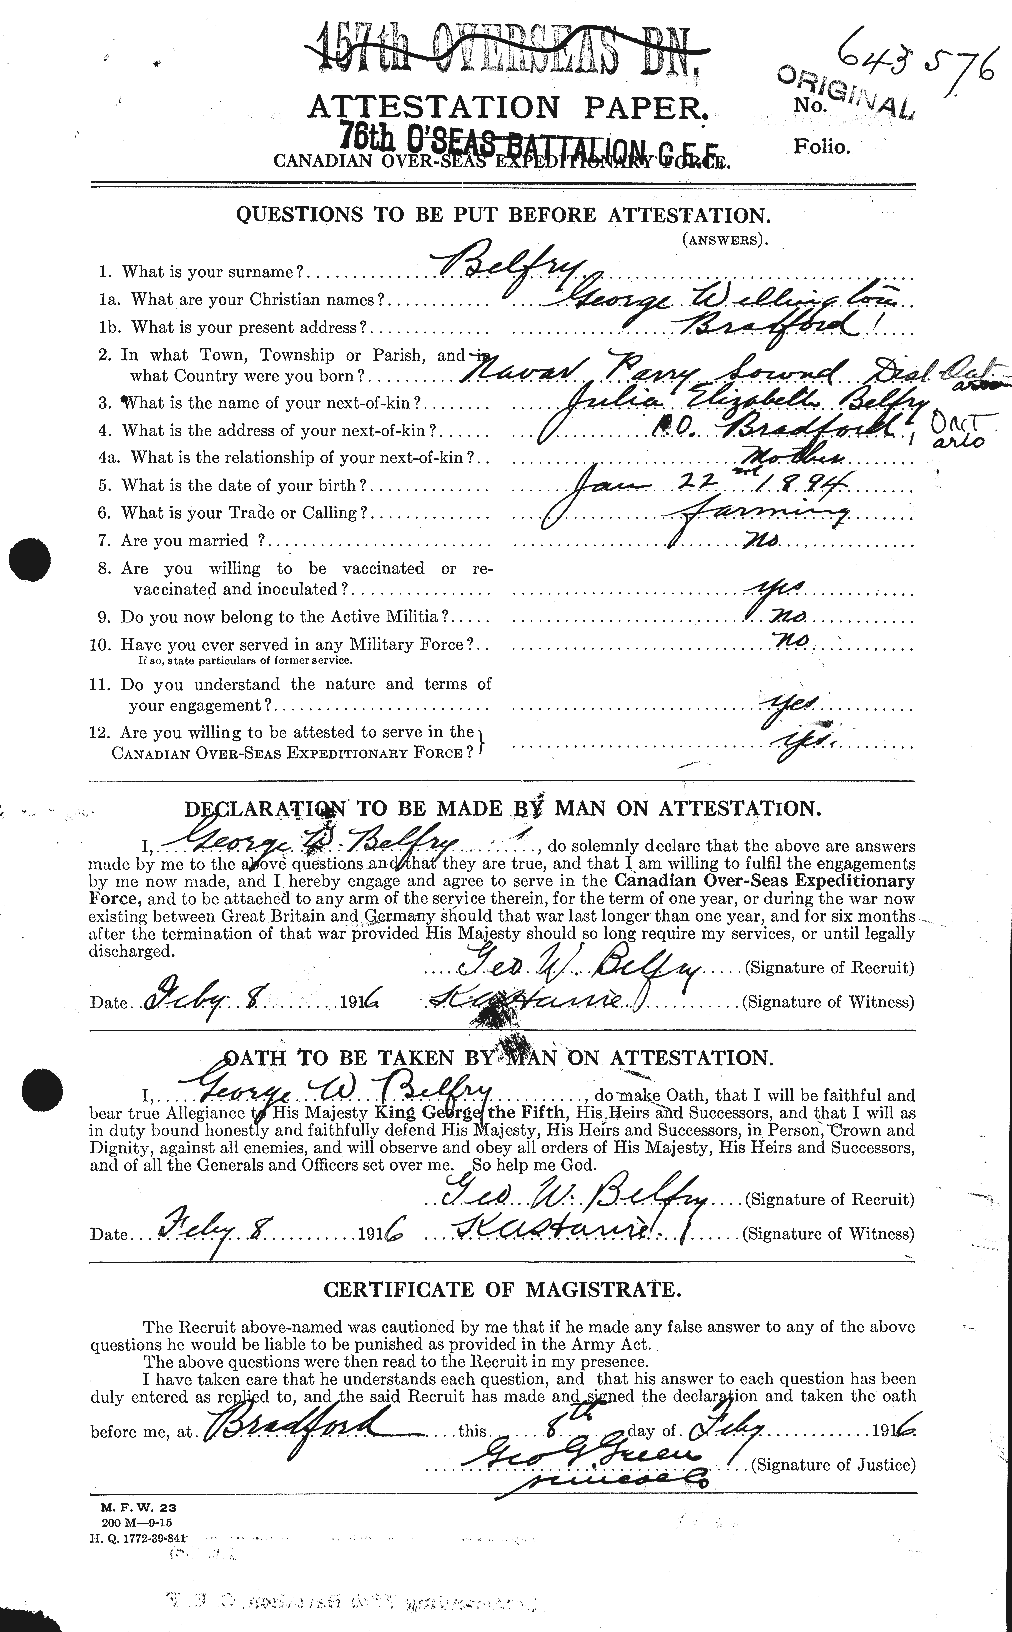 Personnel Records of the First World War - CEF 232440a